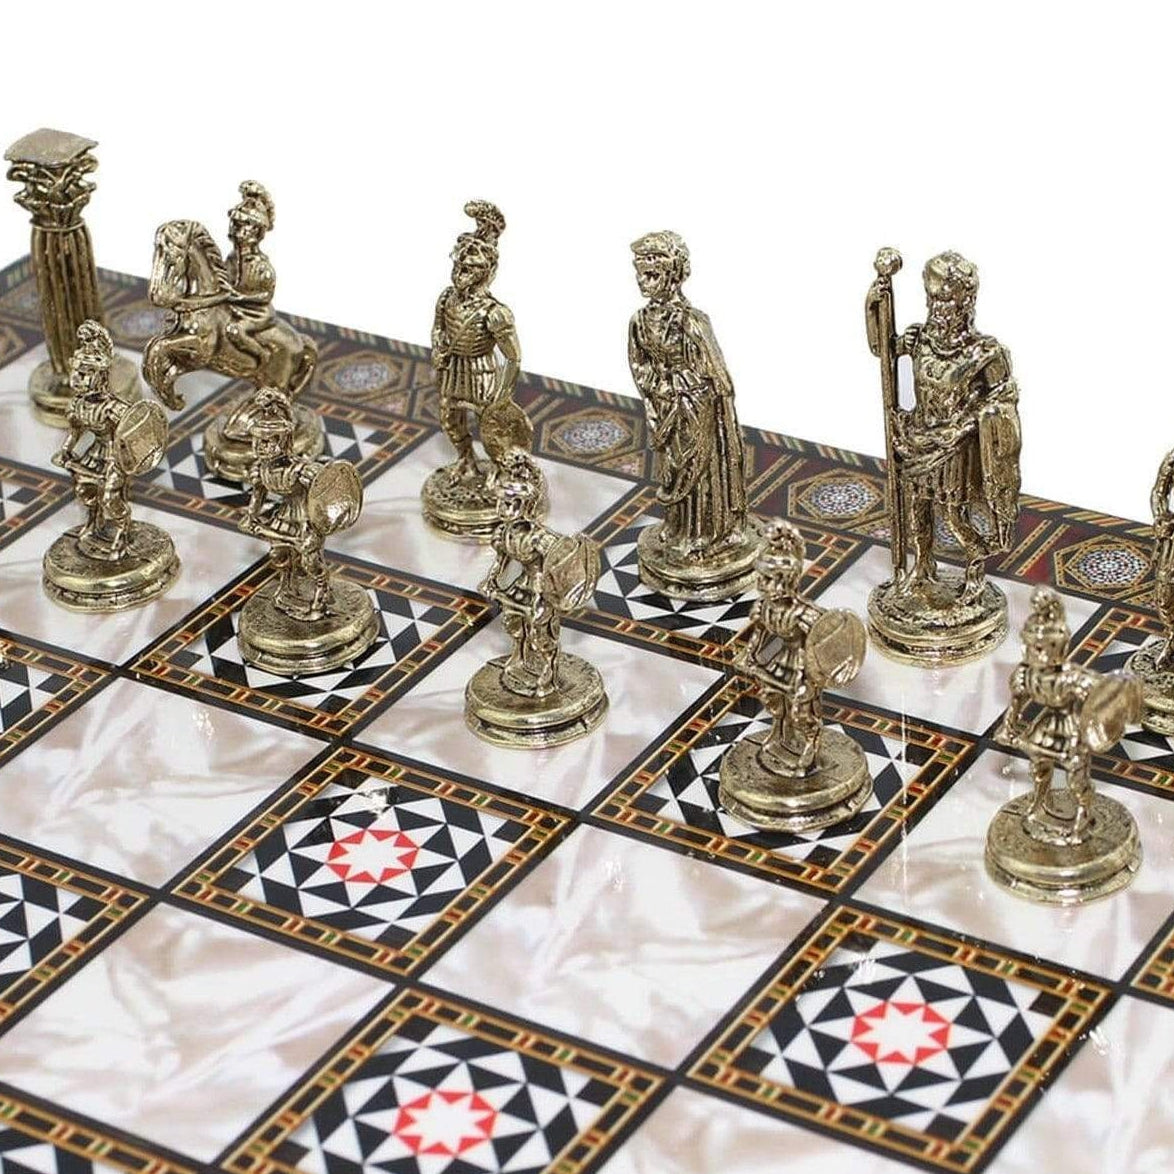 Mosaic Designer Chess Board | Historical Roman Hand Crafted Chess Pieces | Complete Classic Set | whatagift.com.au.